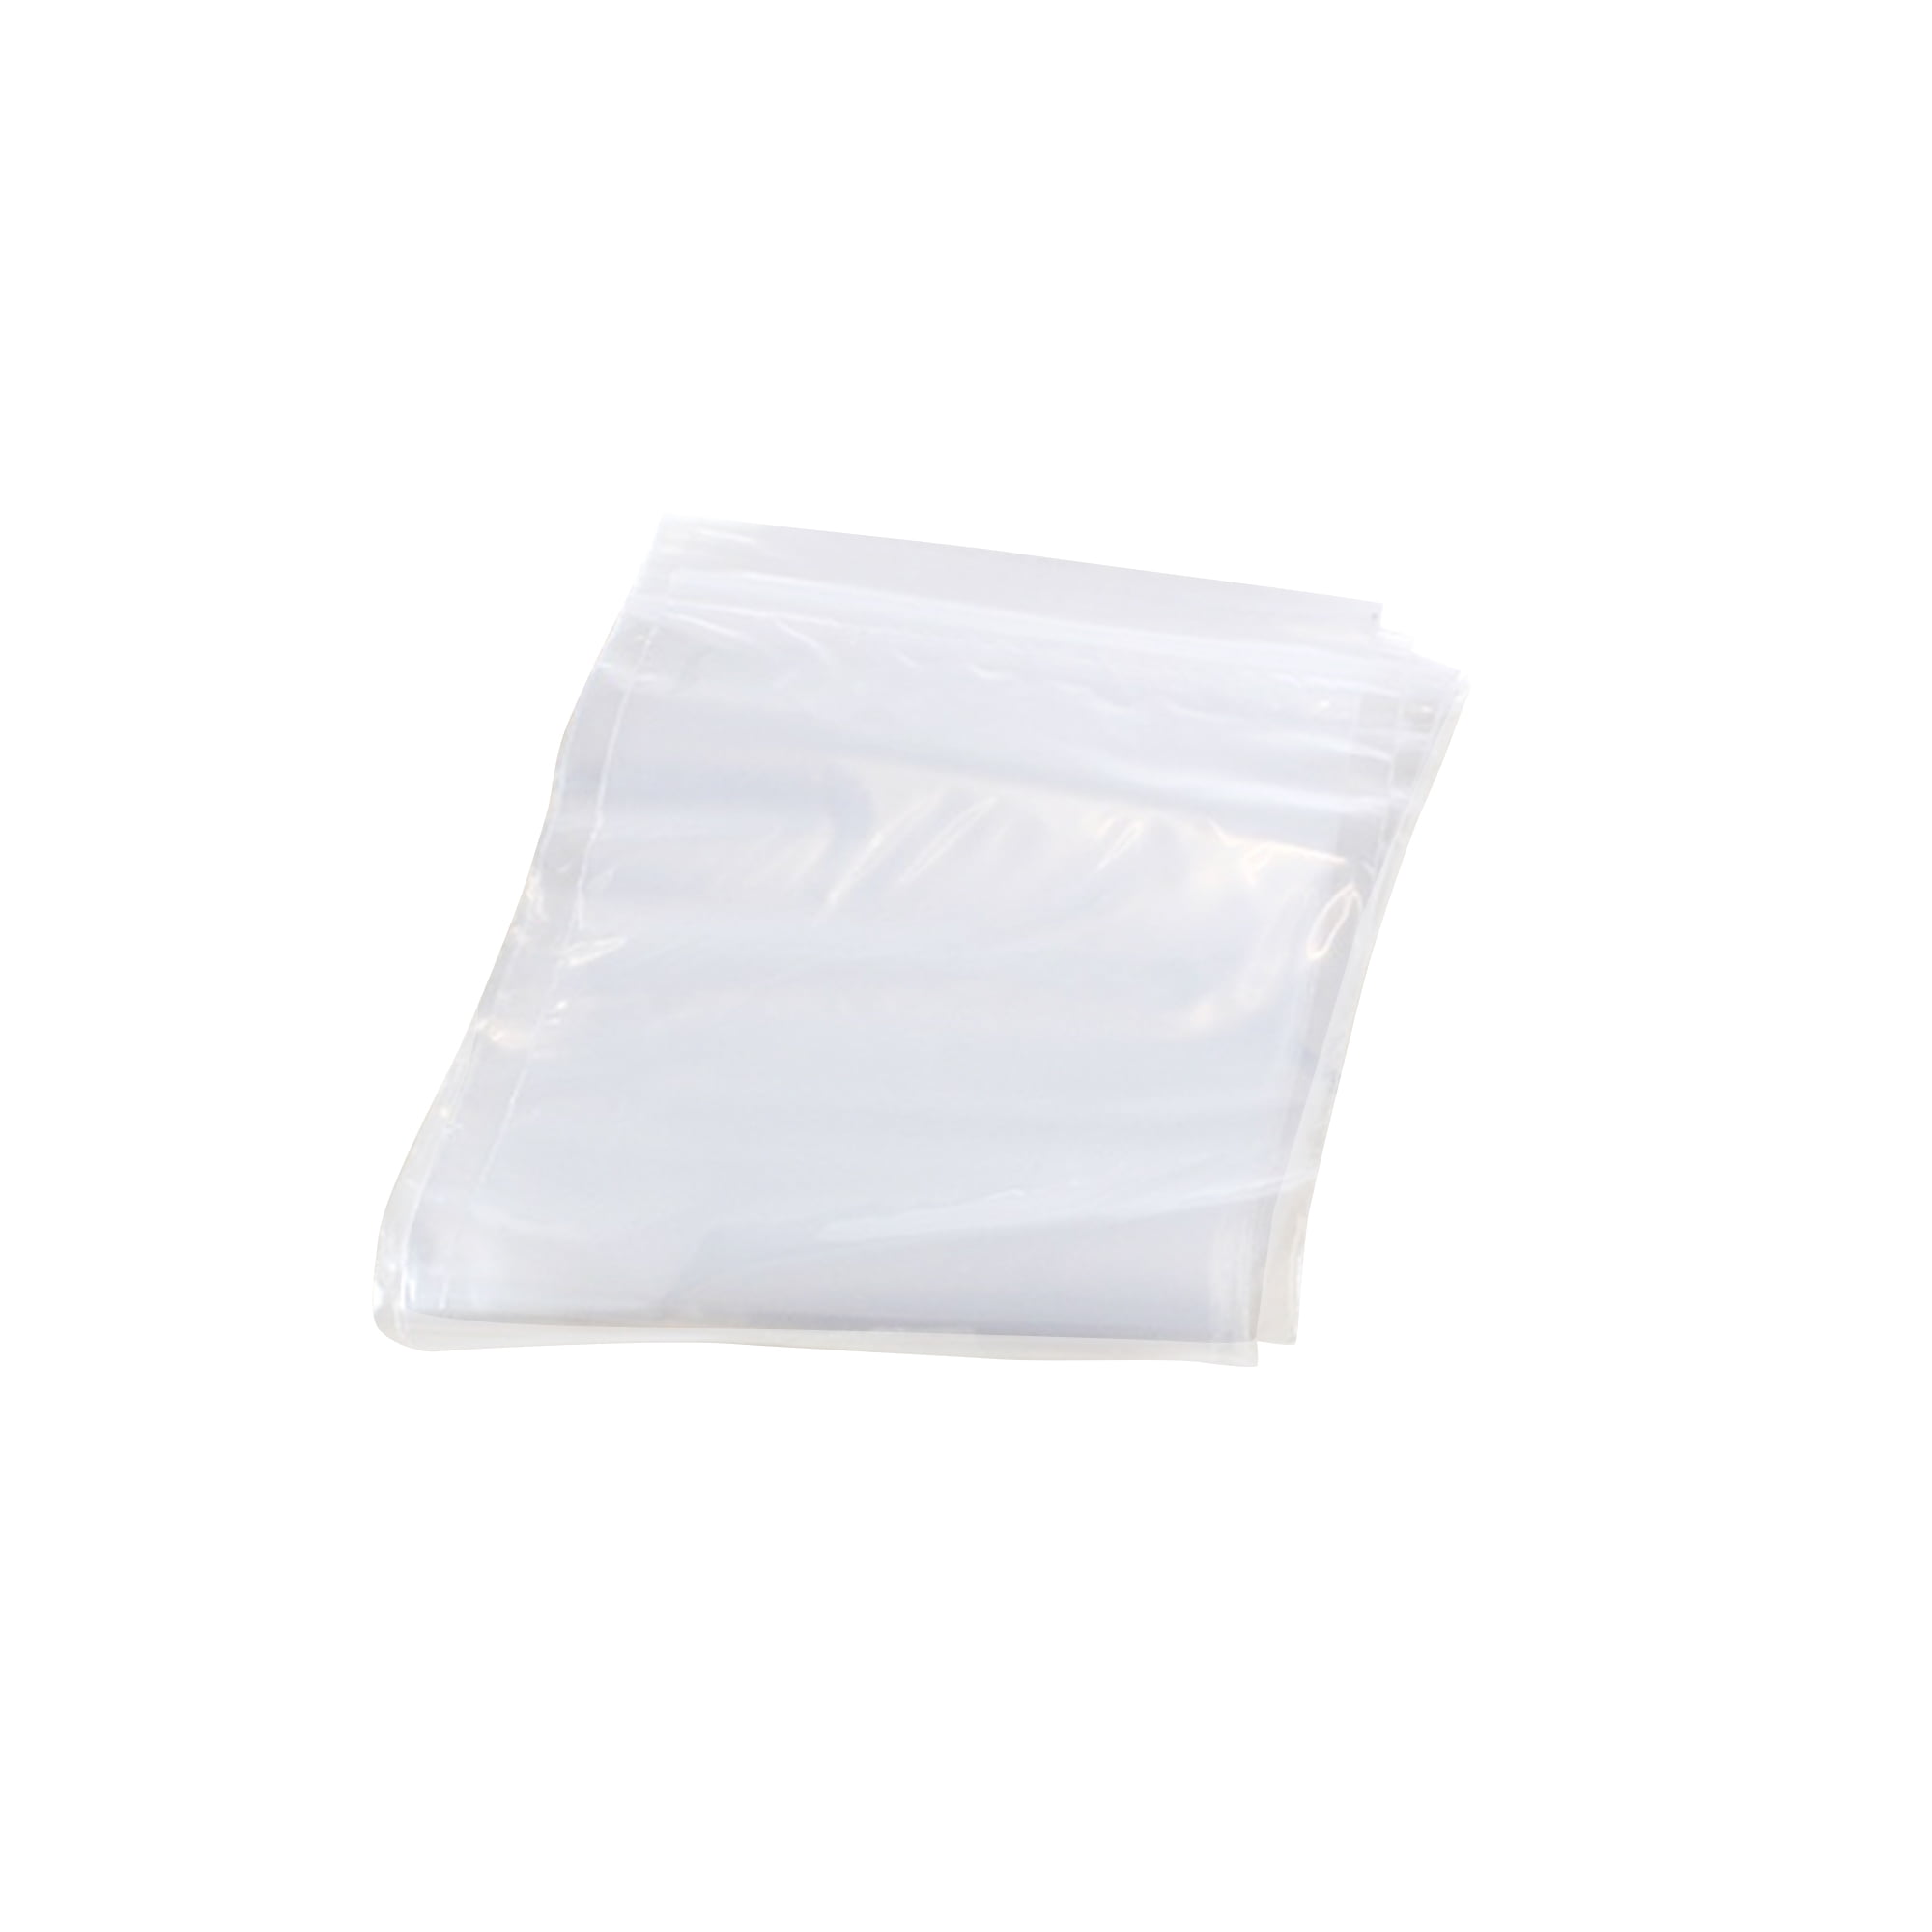 2000 Clear 3.5 x 4.5" RESEALABLE Poly Plastic Grip Seal Bags SELF SEAL 